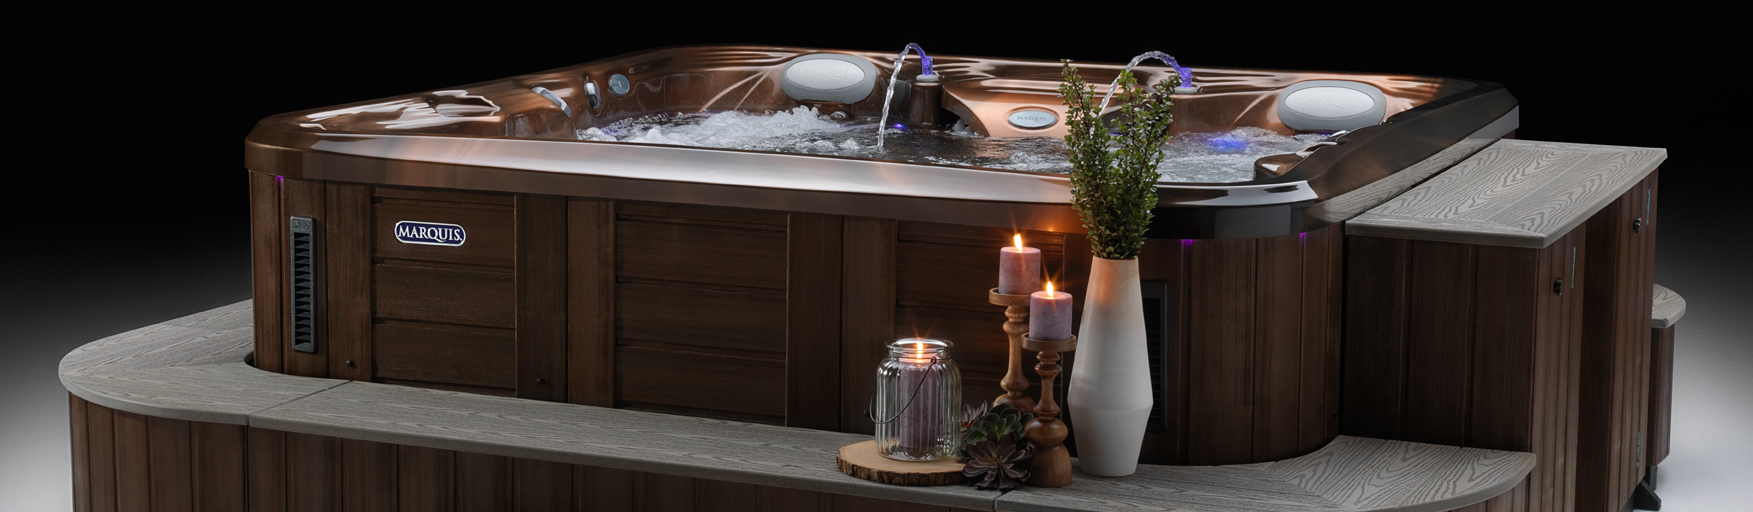 Relax in a quality Marquis Hot Tub